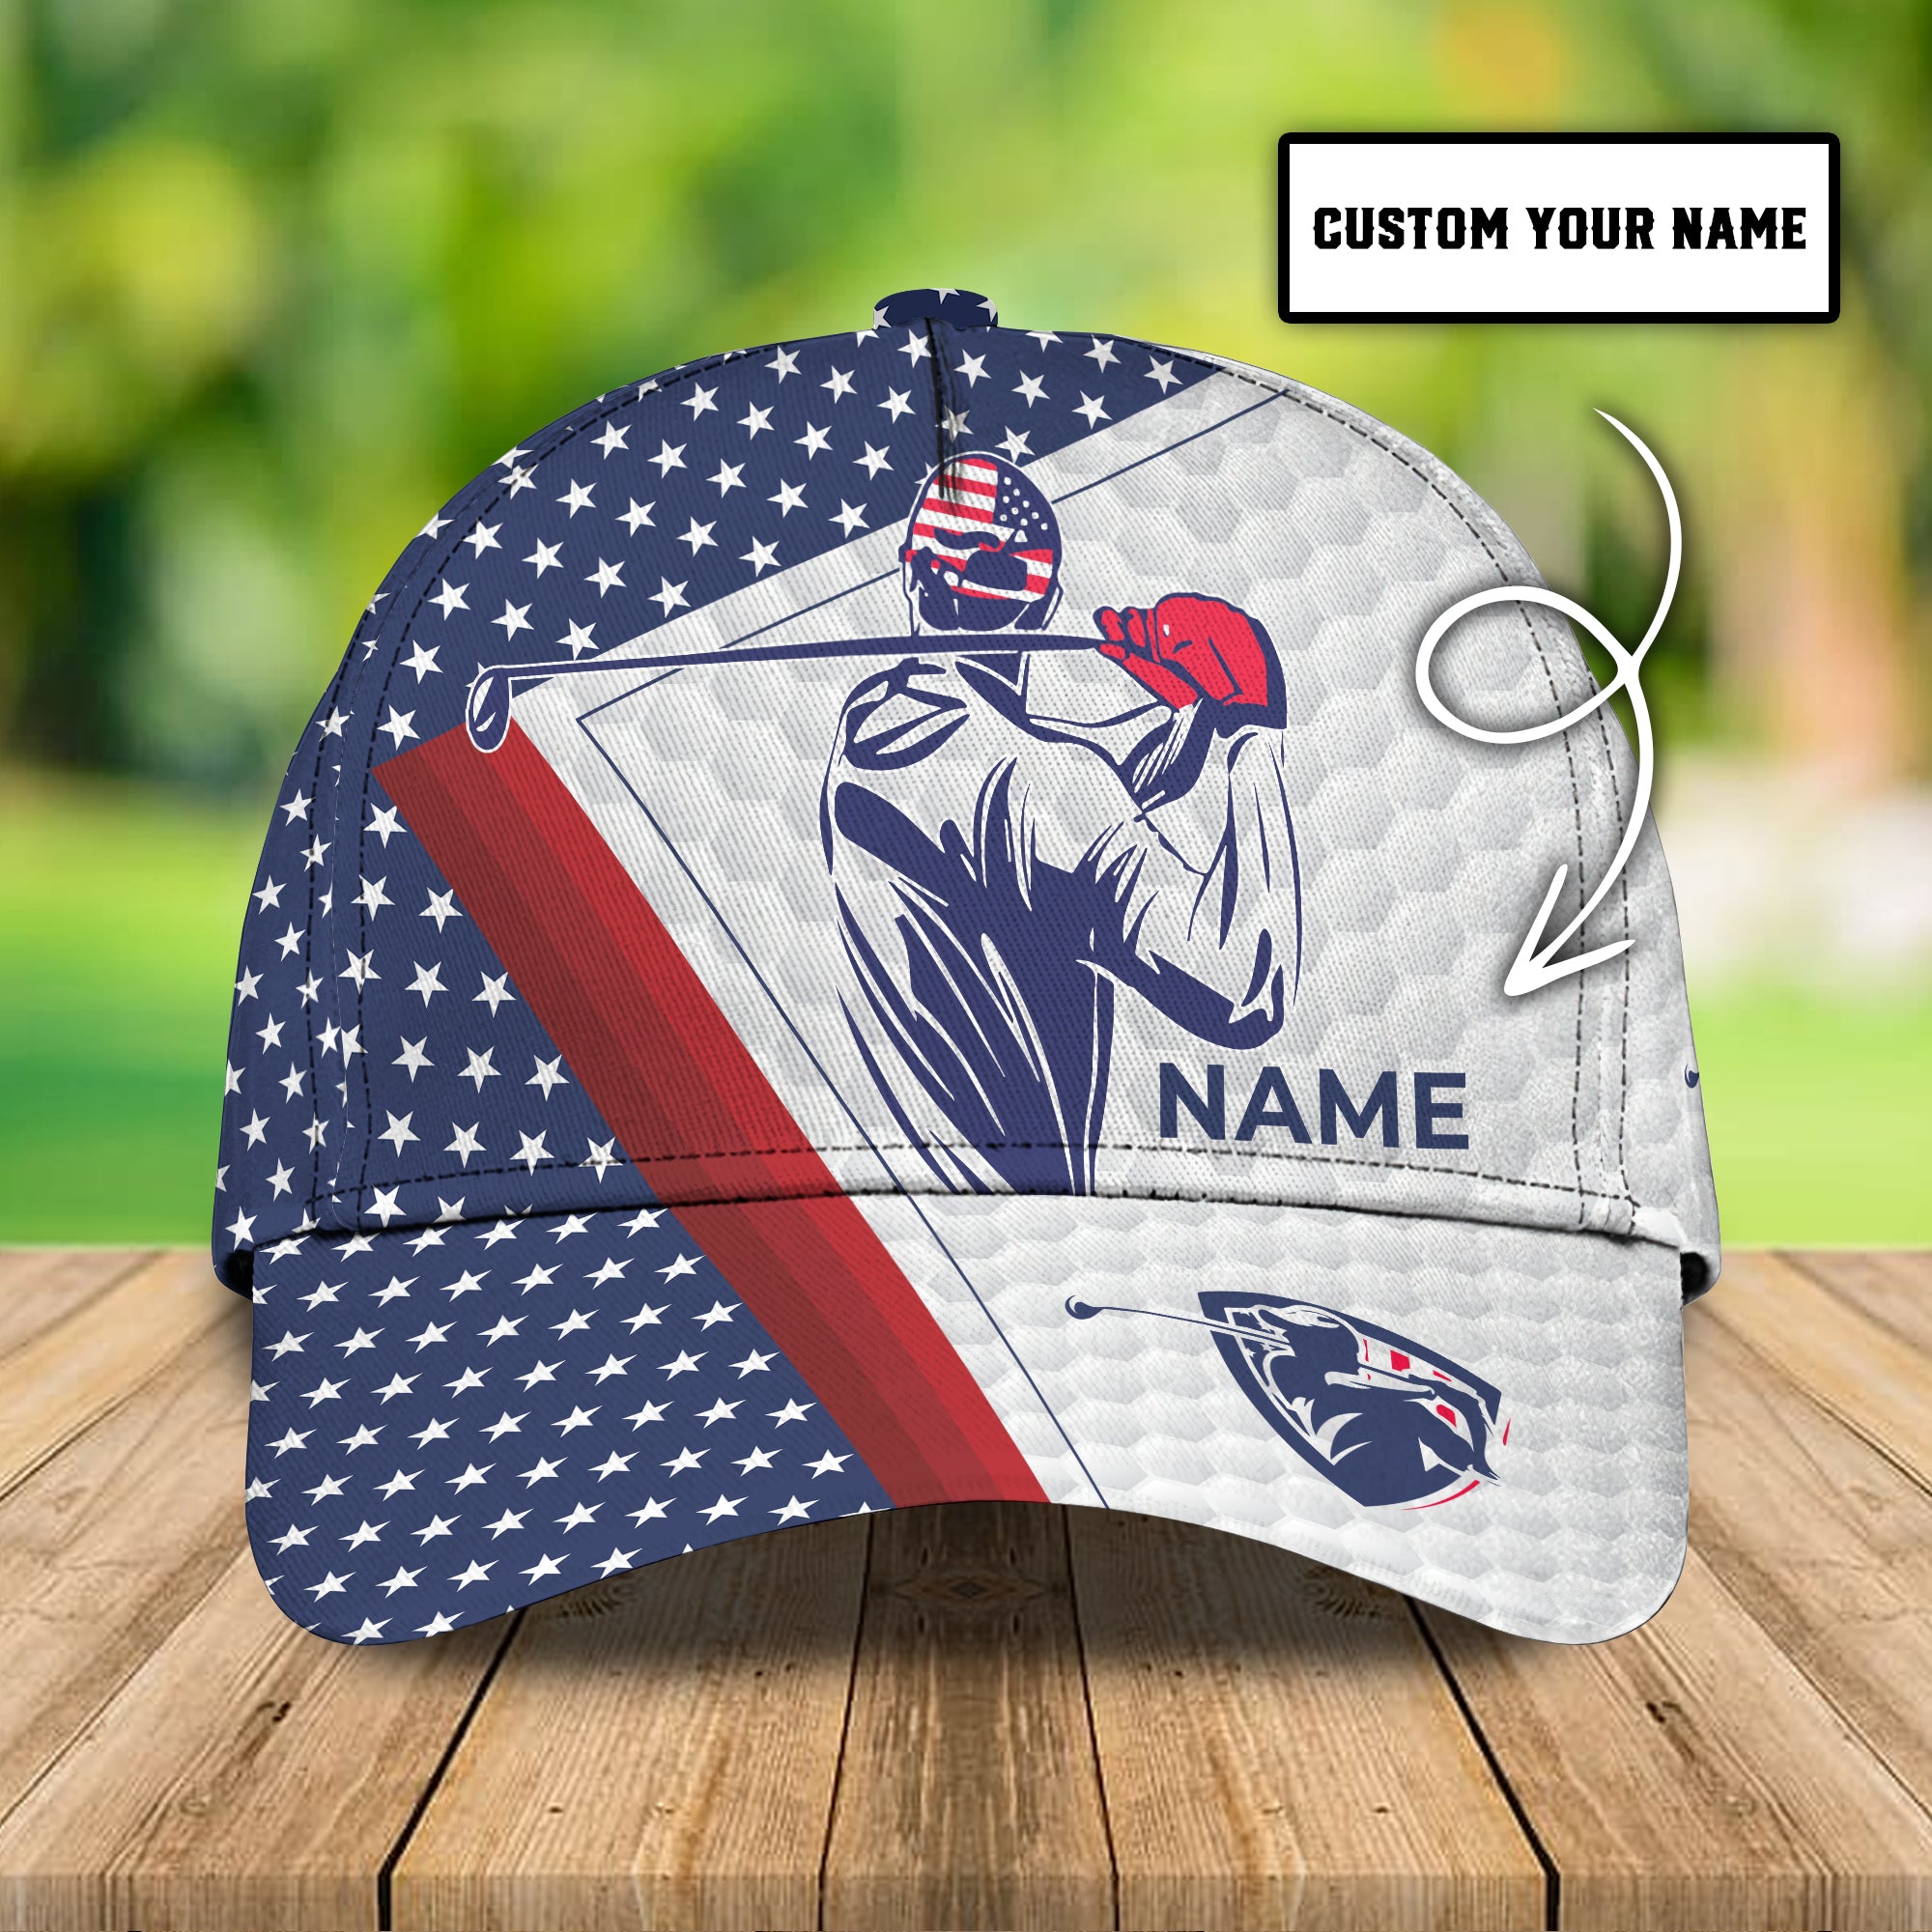 Golfer - Personalized Name Cap - Co98